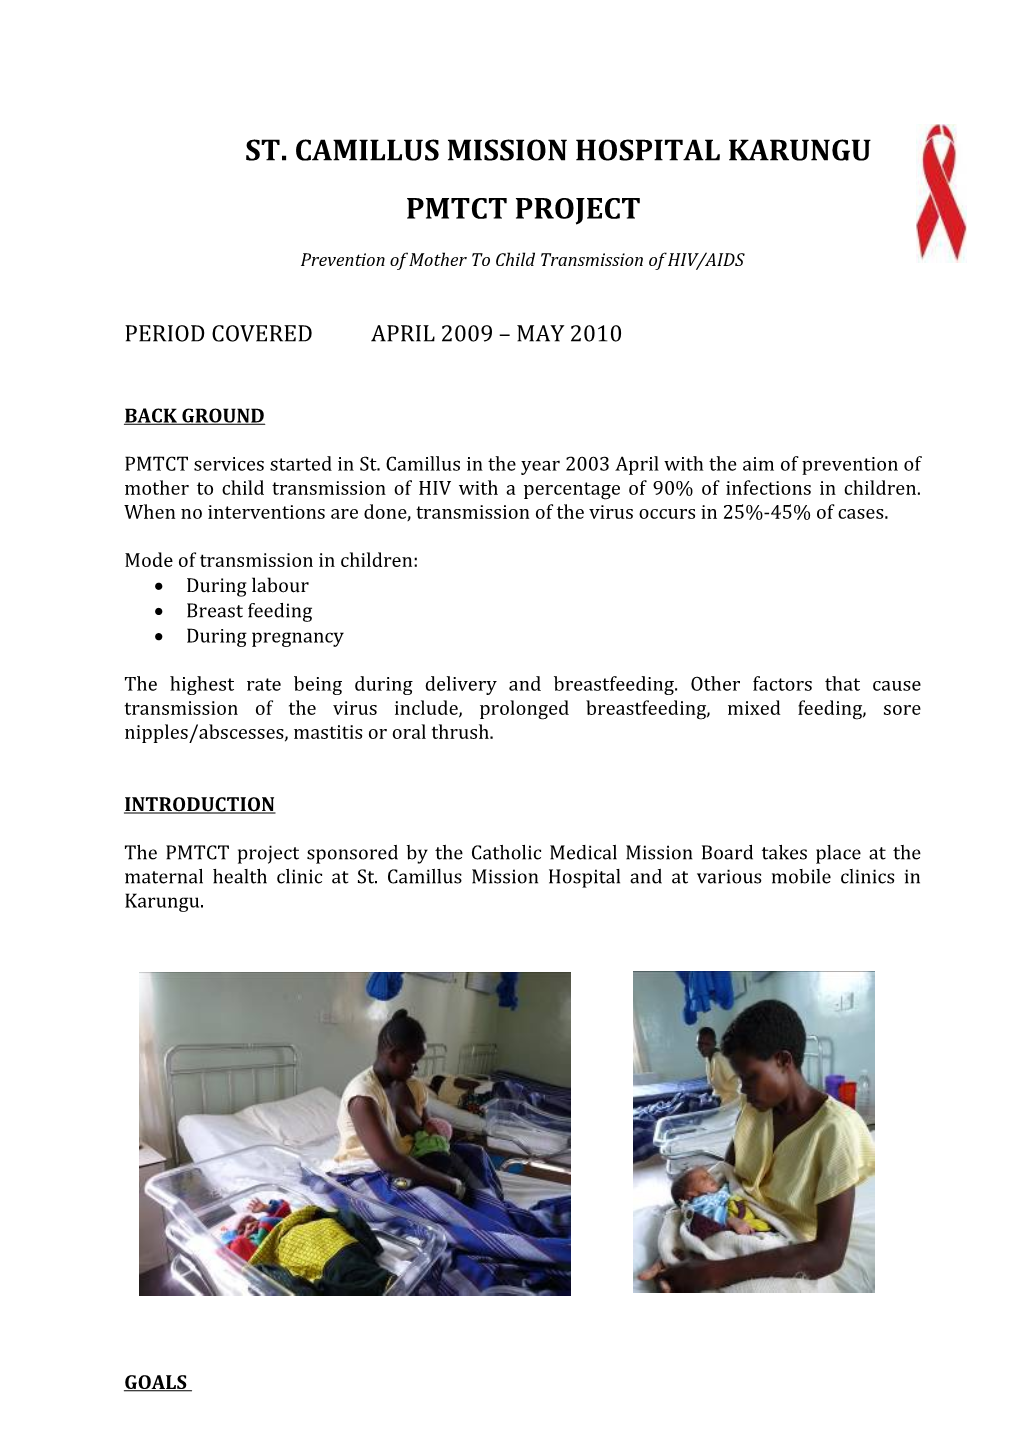 Prevention of Mother to Child Transmission of HIV/AIDS